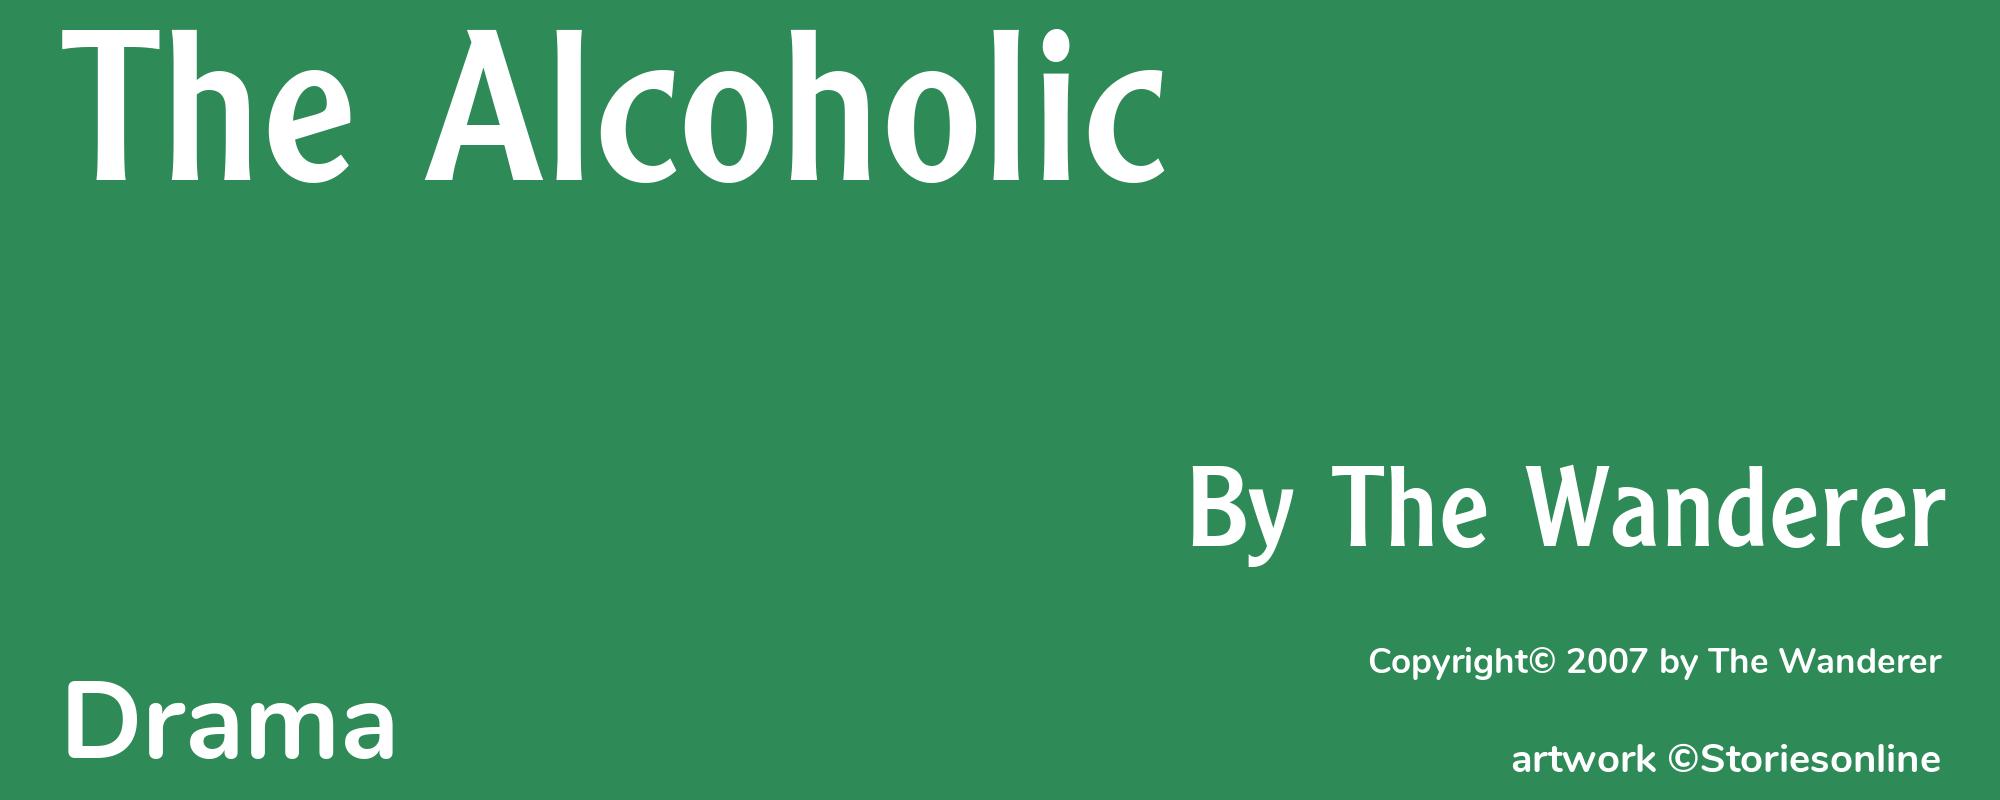 The Alcoholic - Cover